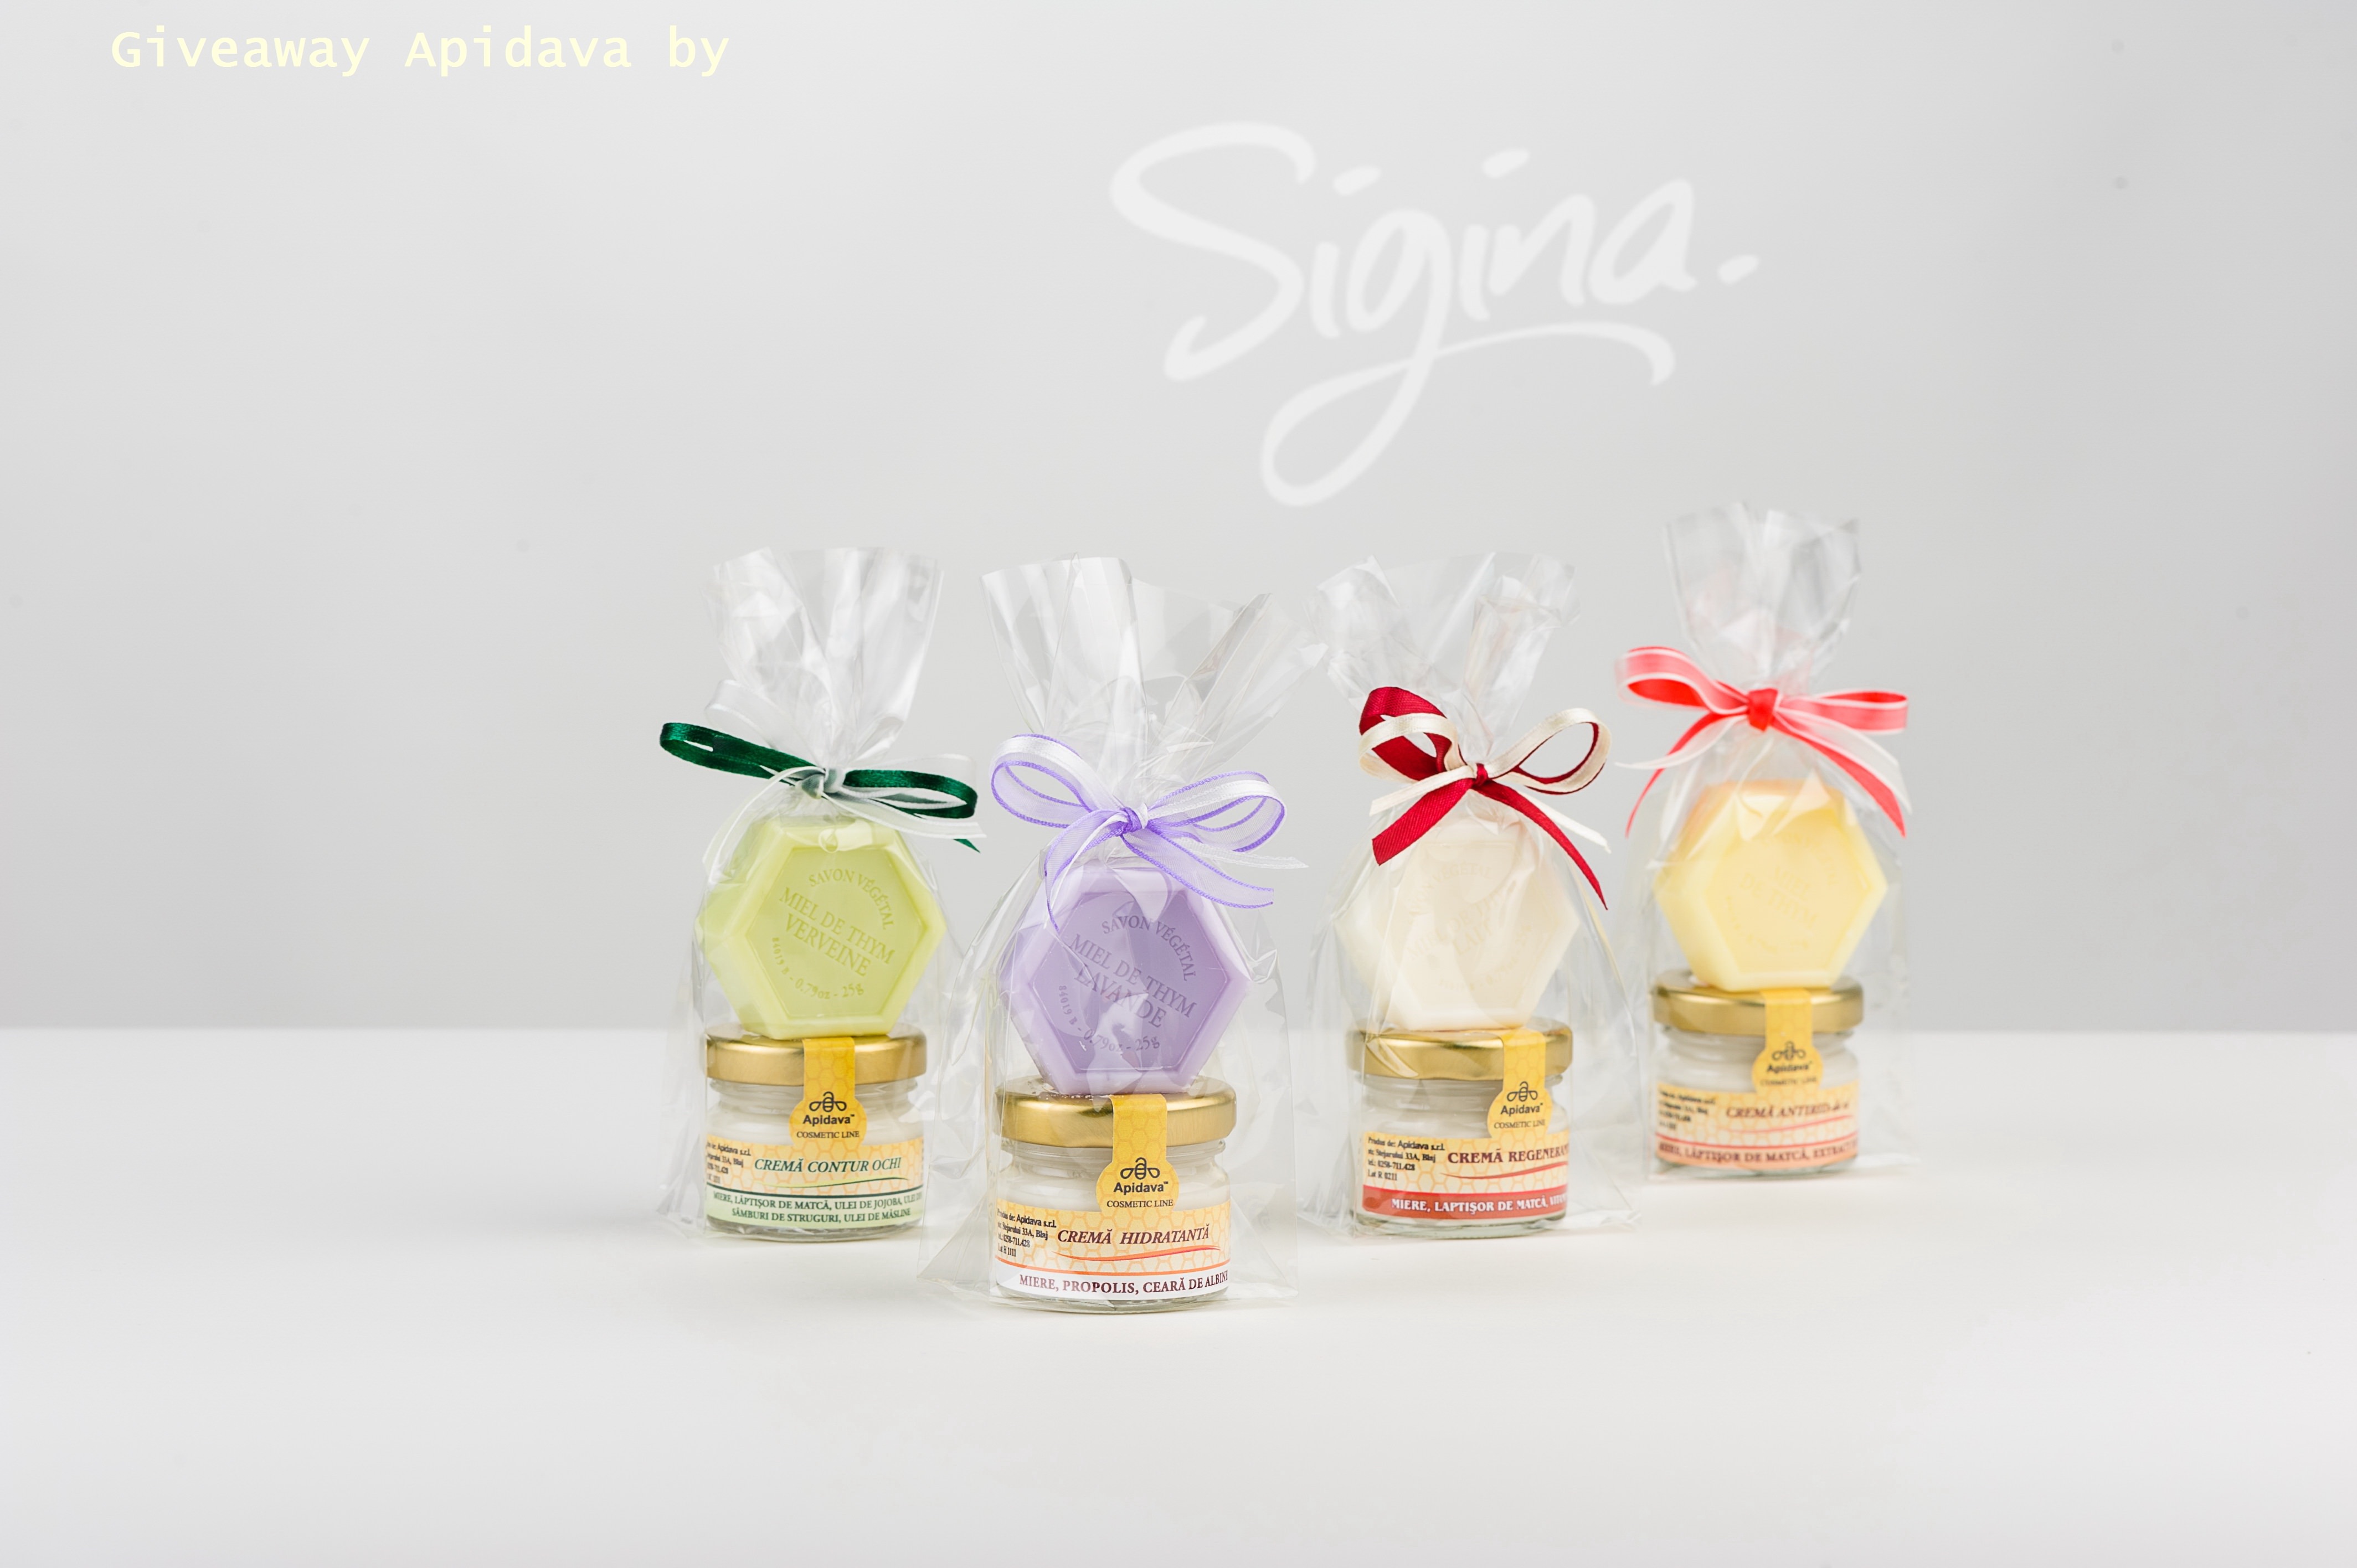 Giveaway Apidava by Sigina